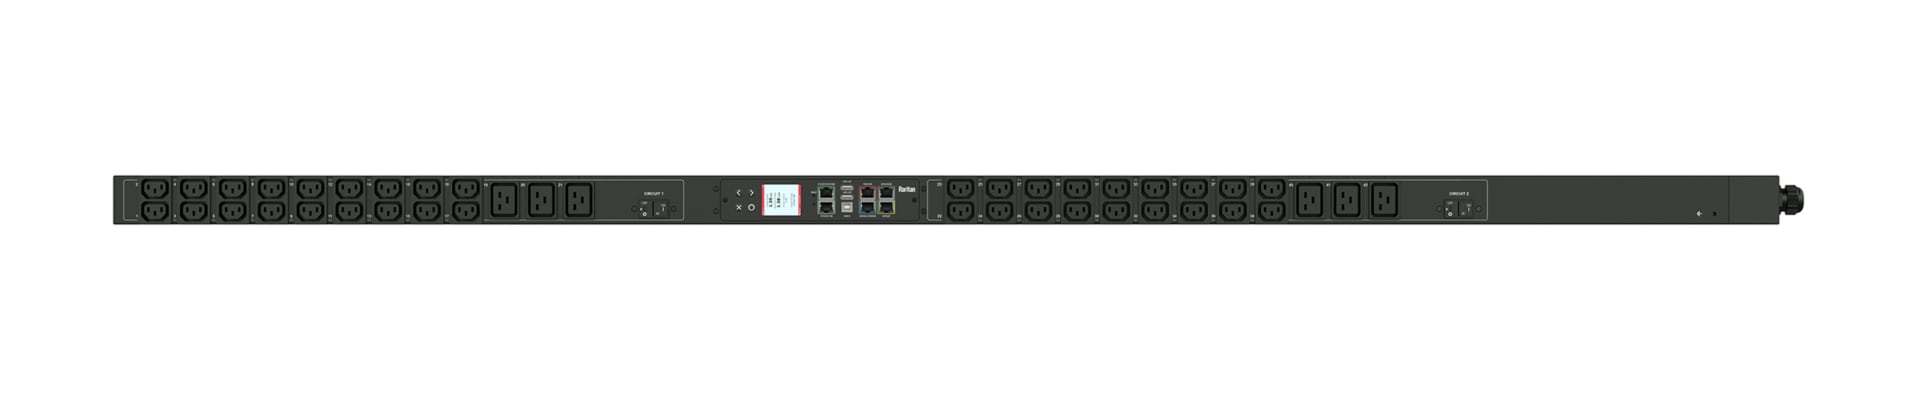 Raritan Single Phase 208V 24A Rack Power Distribution Unit with 42 Outlet